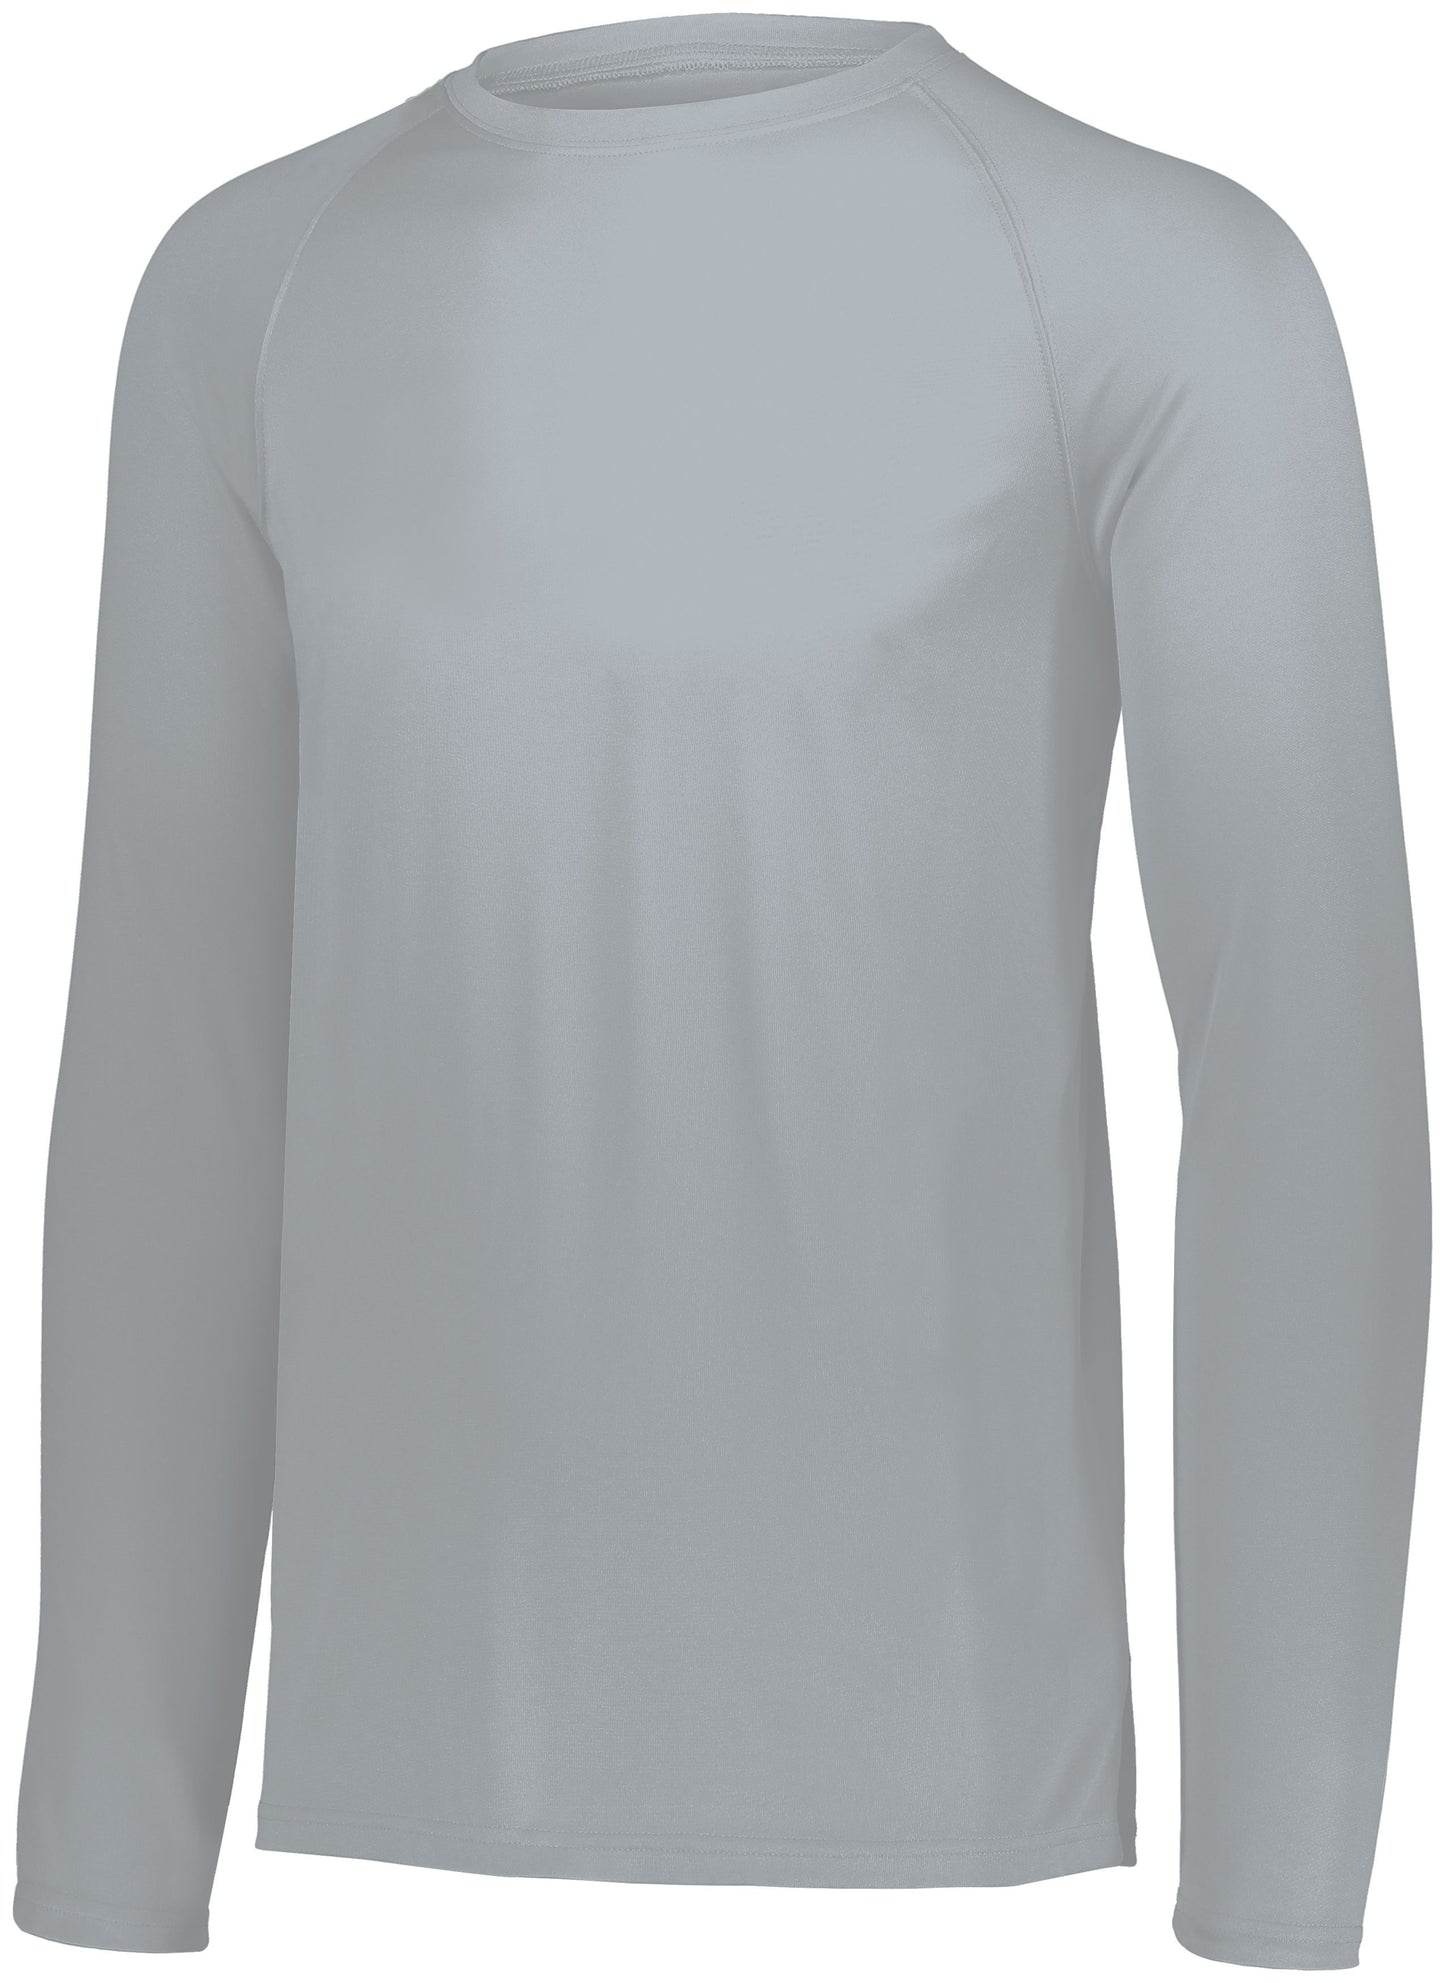 2795 ATTAIN WICKING LONG SLEEVE TEE 2XL and up